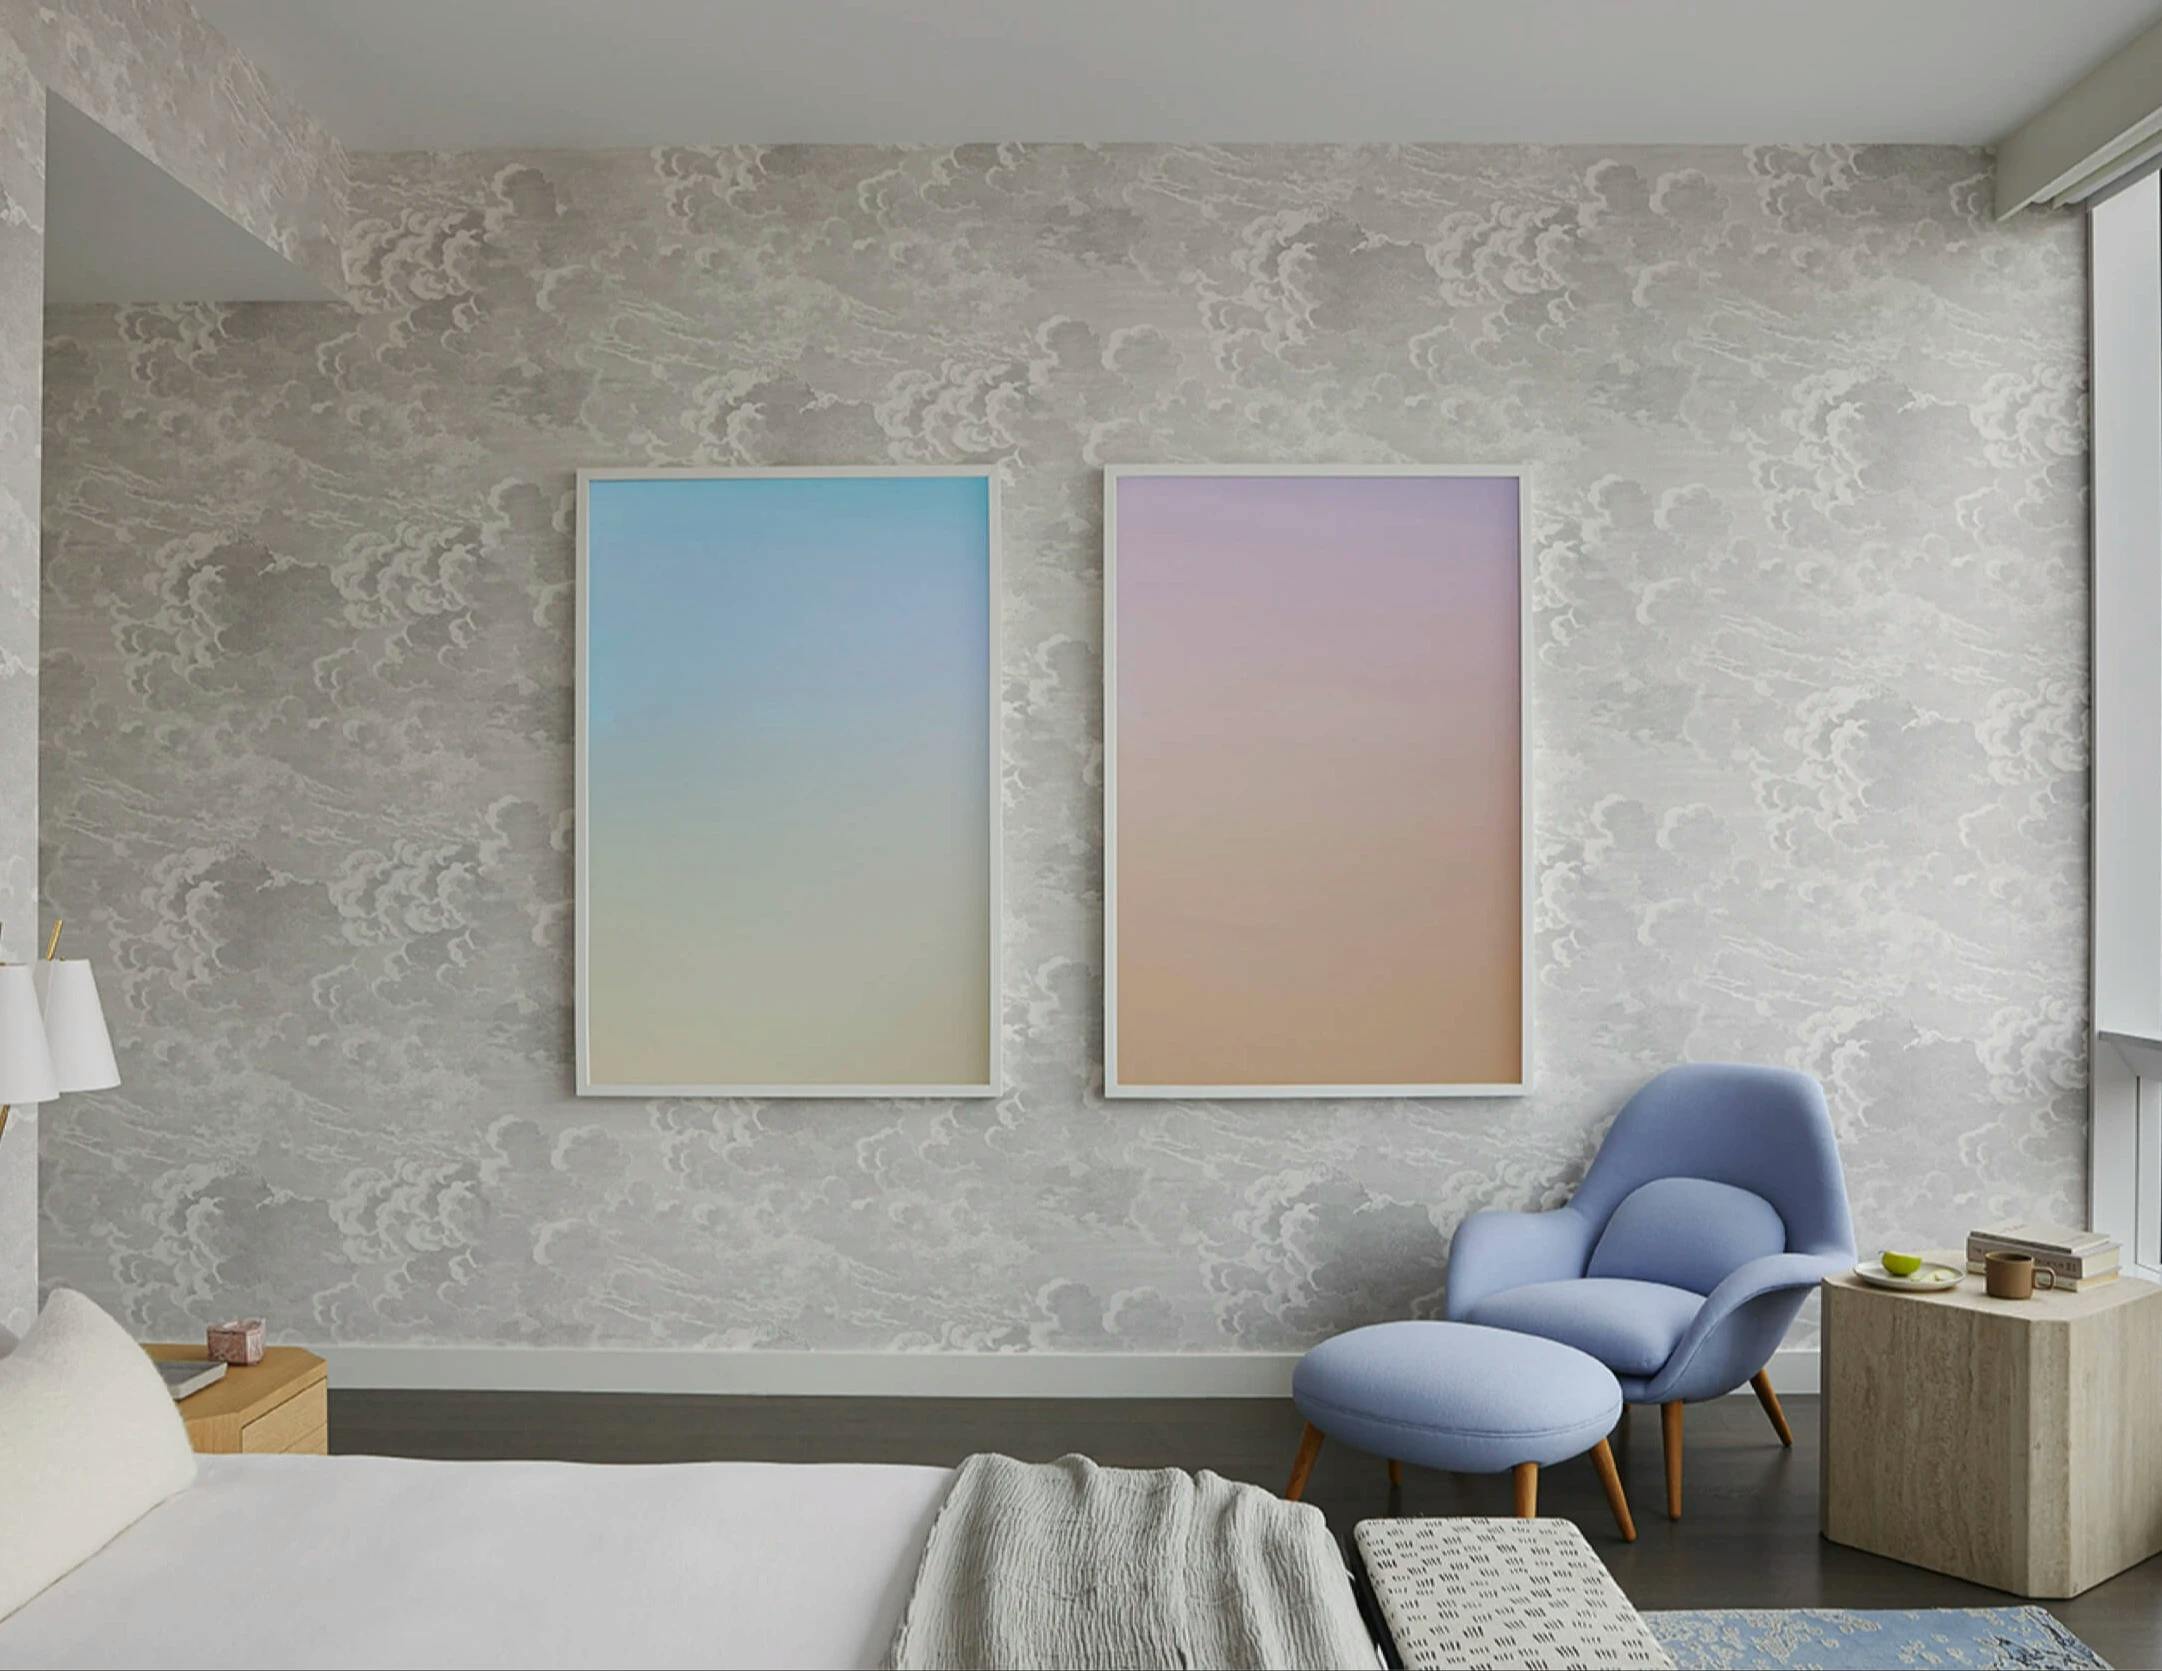 Two large photographs of pastel-colored skies by artist Jordan Sullivan installed side-by-side on a gray bedroom wall with a purple reading chair in the corner.